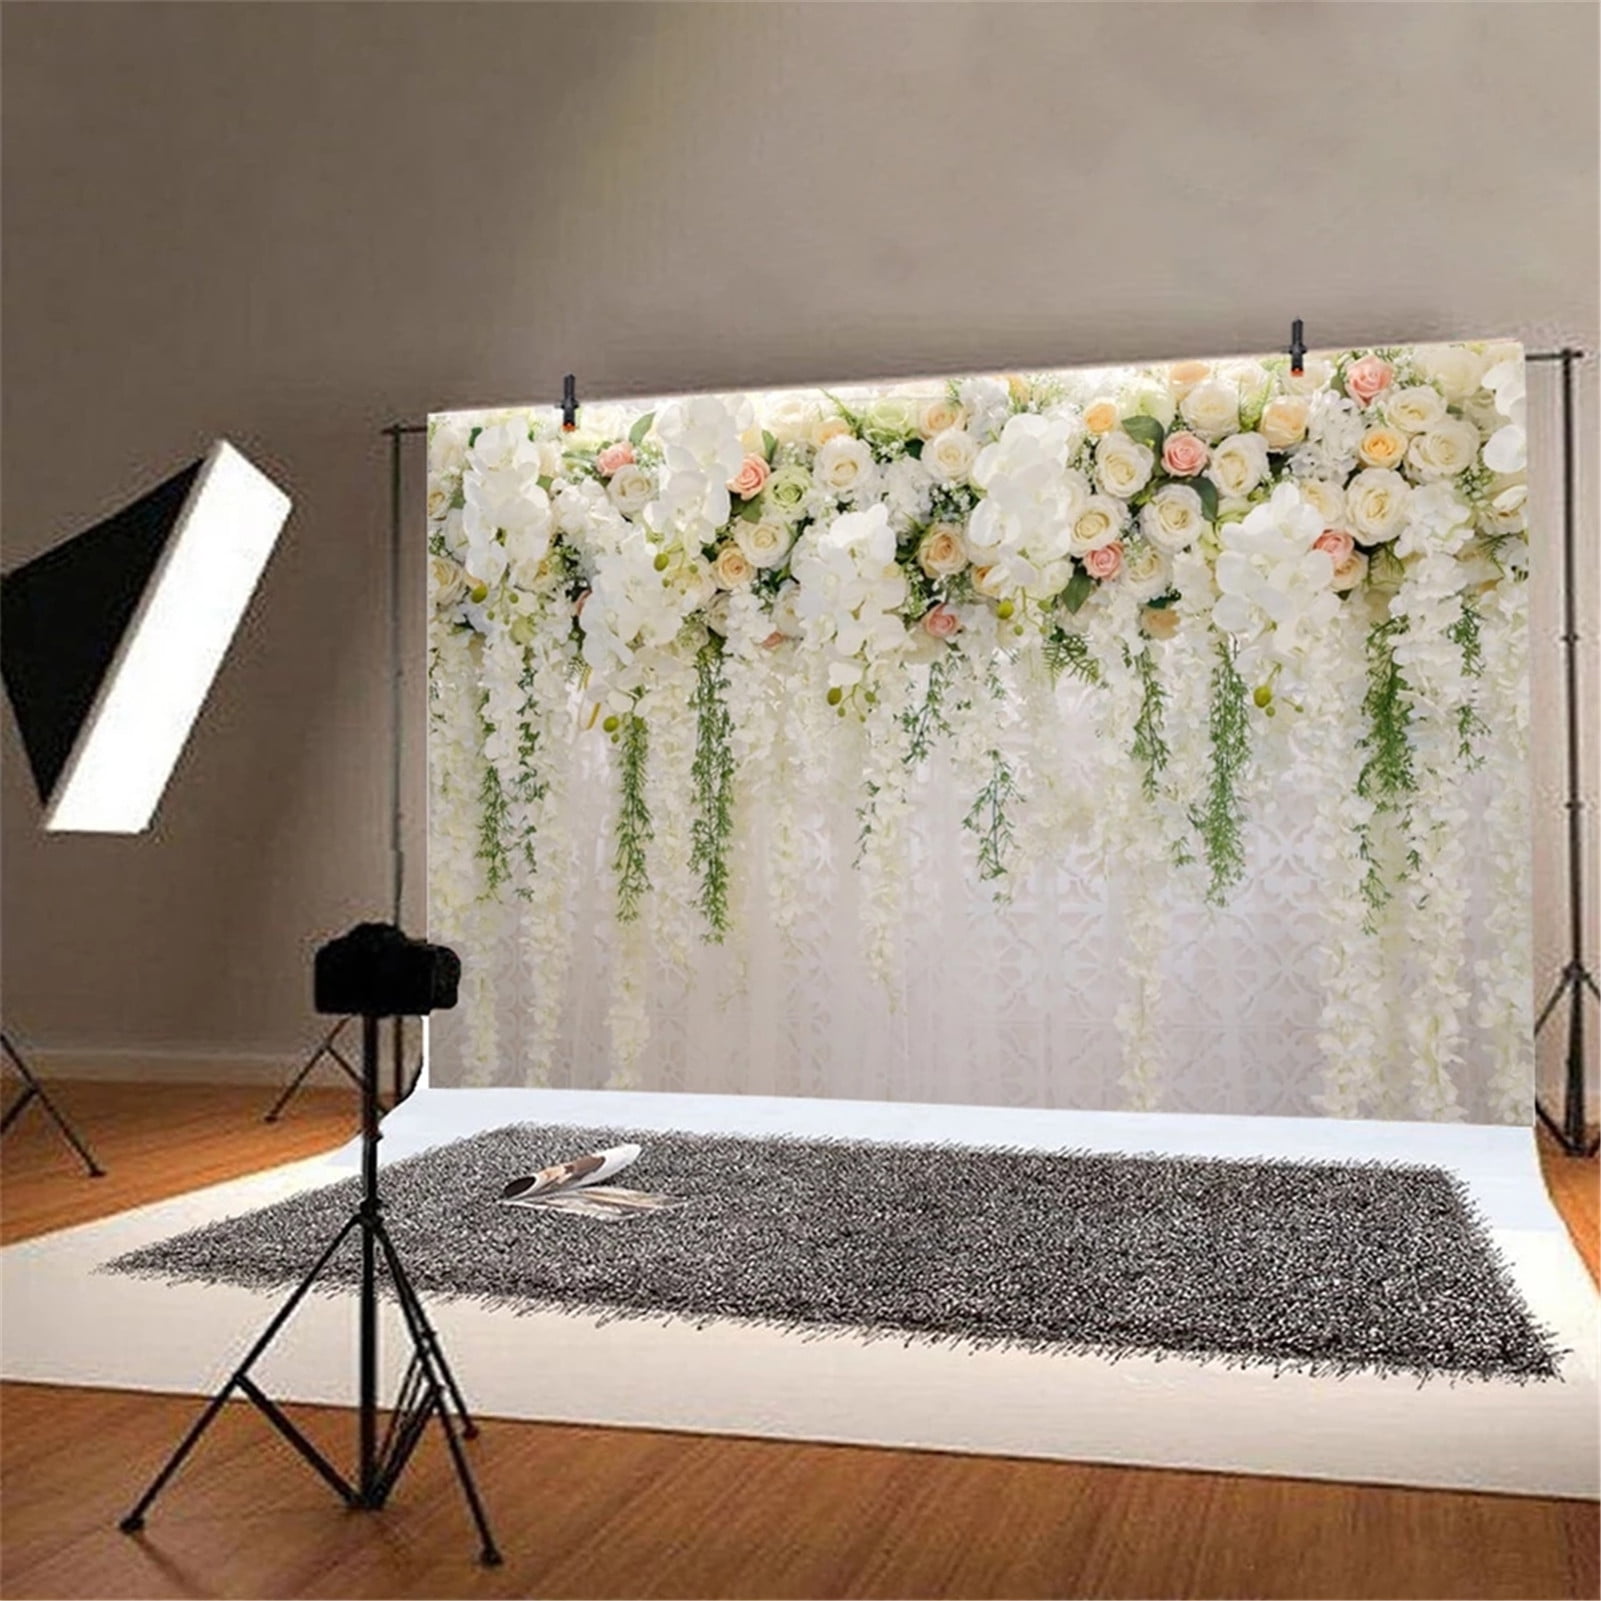 New210x150cm Backdrop Photography Blue Sky Backdrop Vintage Wall Background Cloth Party Wall Background Wedding Party Background Photo Backdrop for Wedding Reception Photography Backdrop Photo Backdro